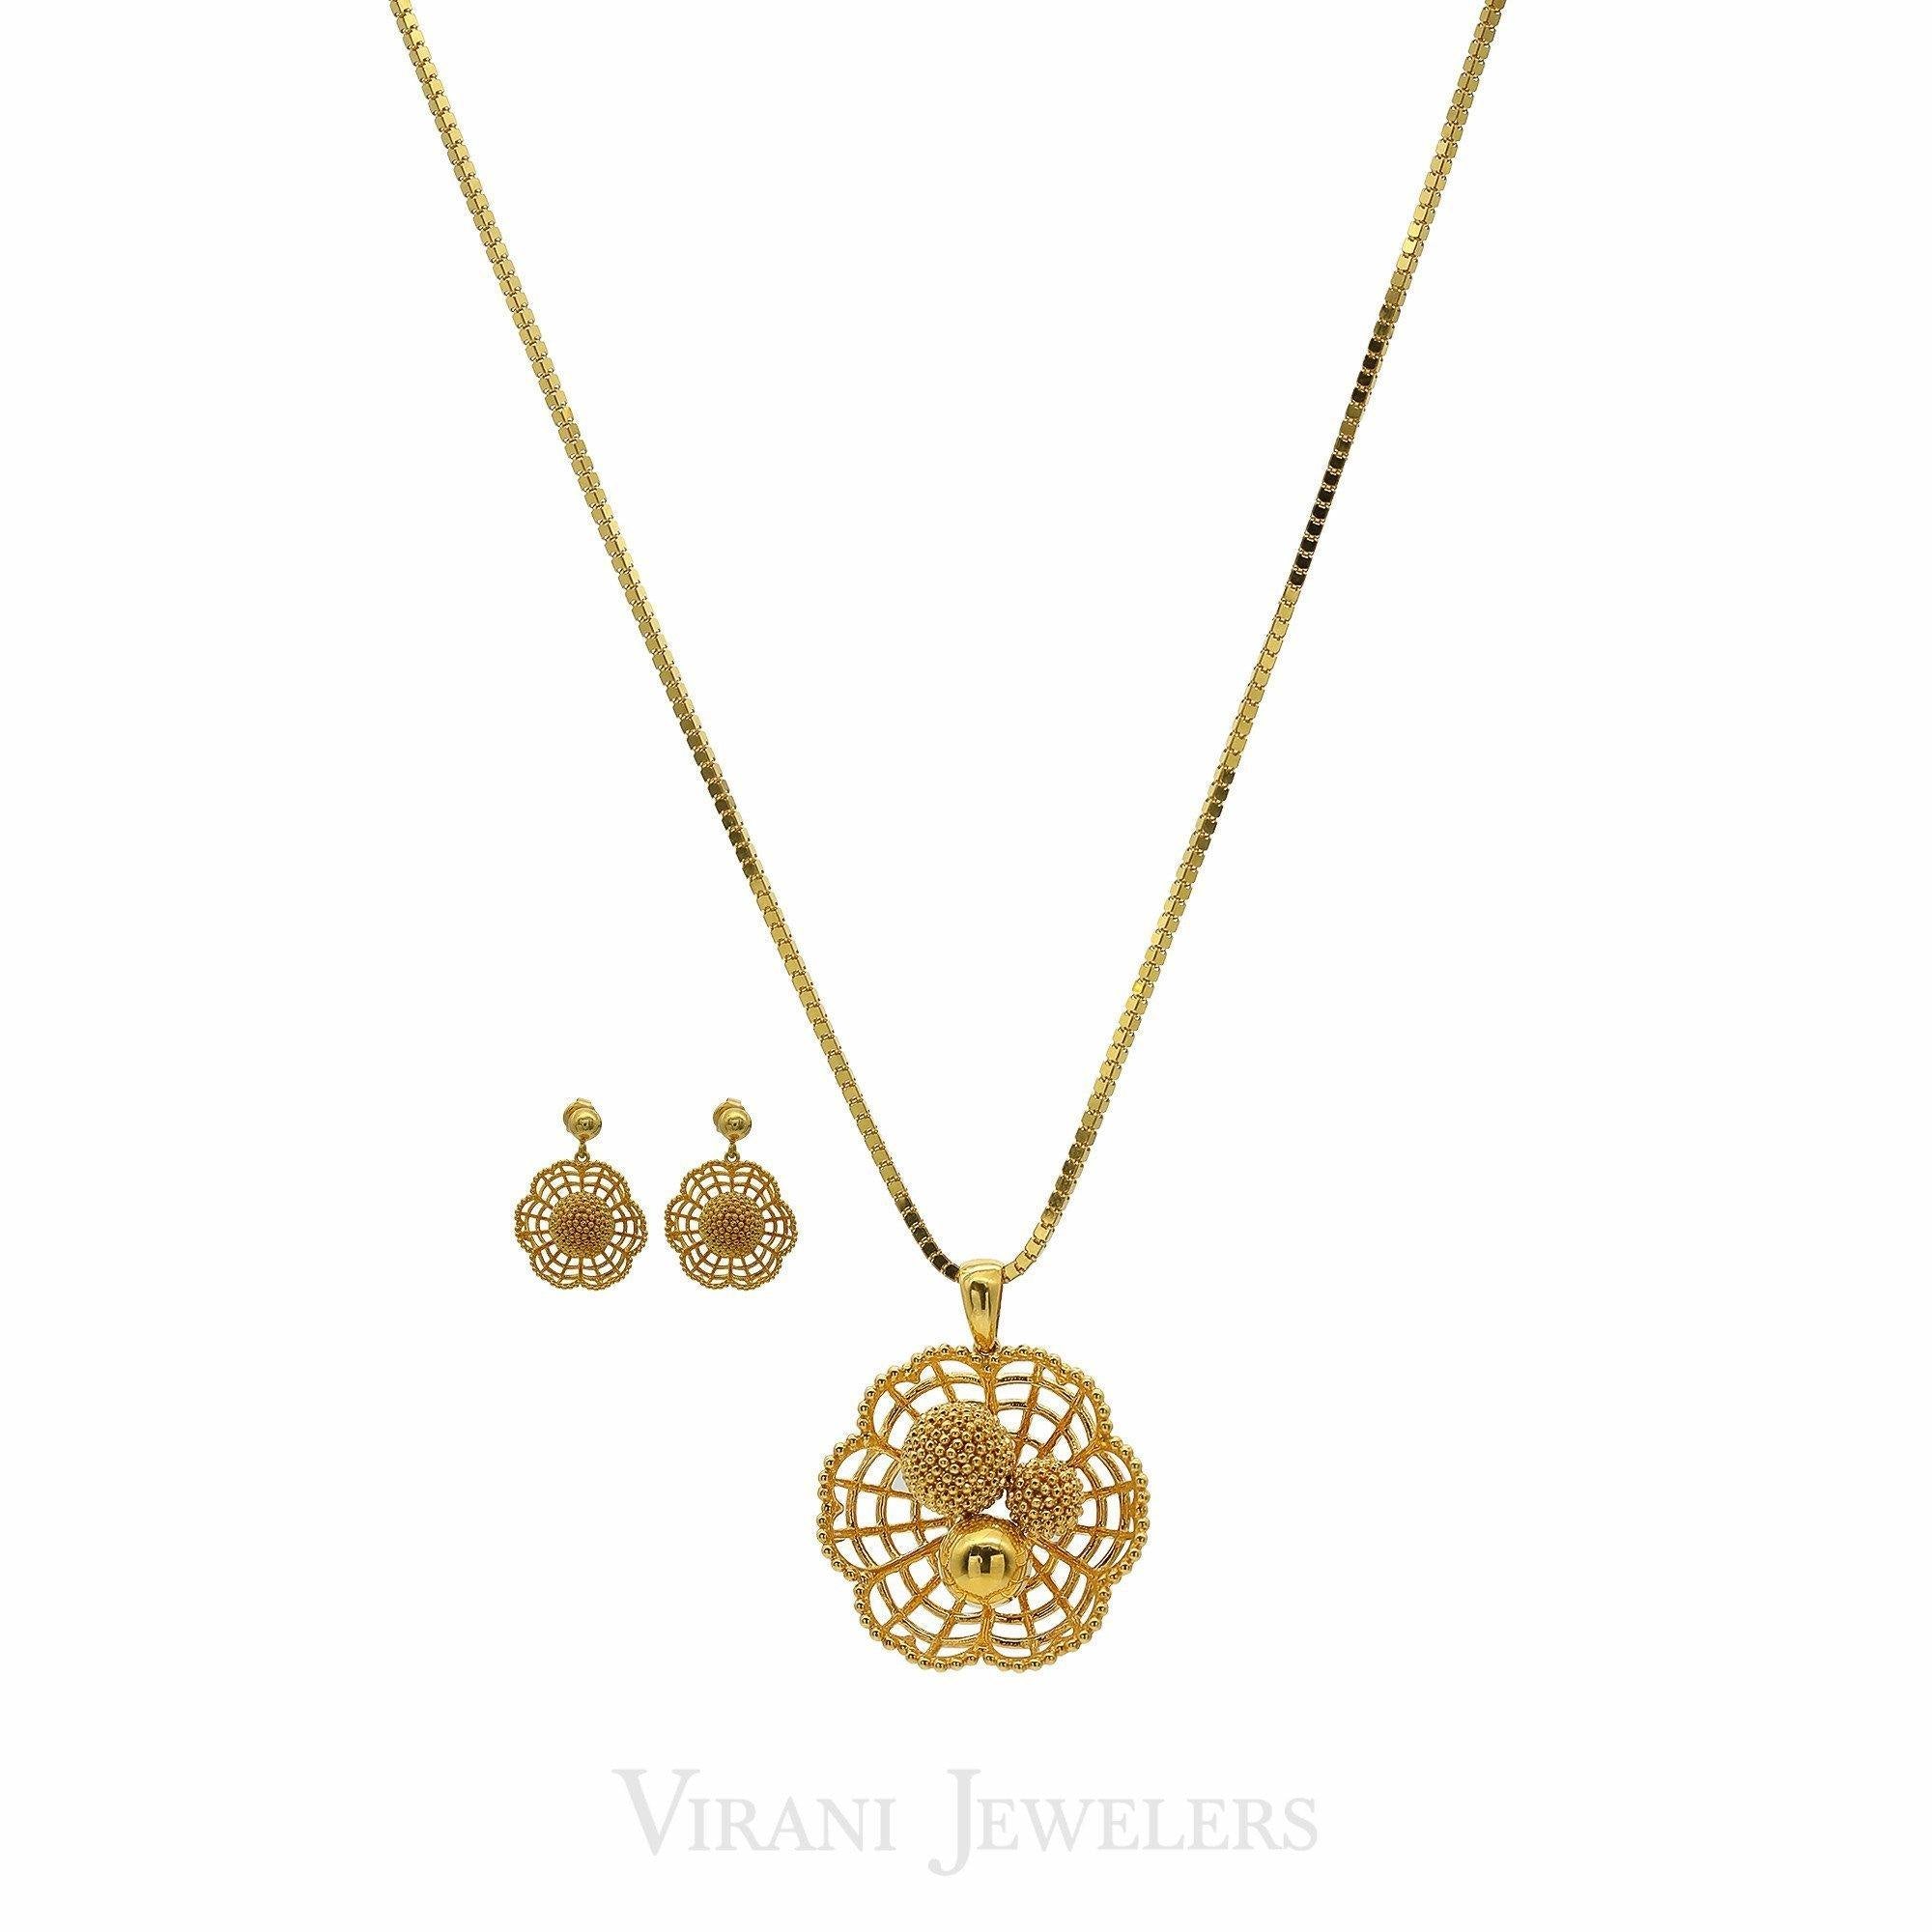 Light-weight 22k Gold Pendant Set | Studded with Precious Stones